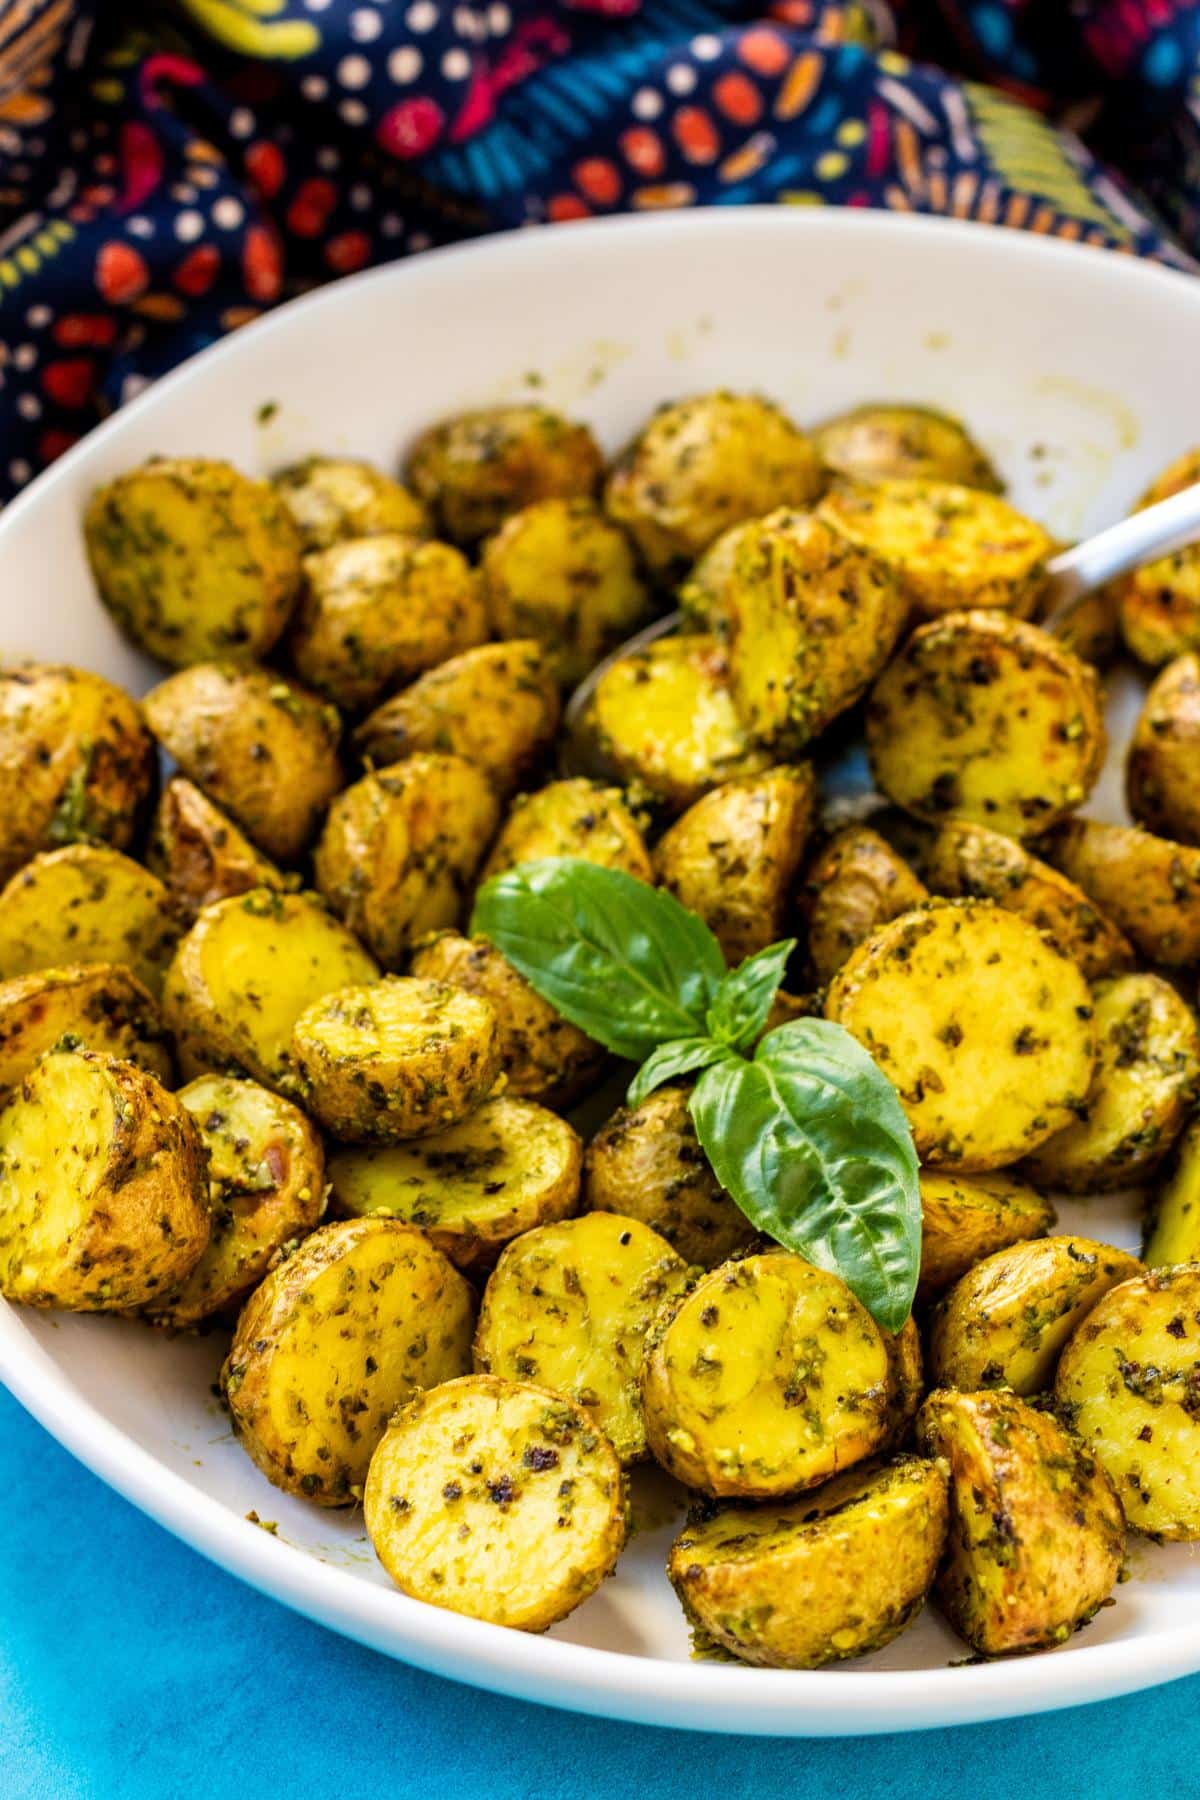 Roasted pesto potatoes in a serving bowl garnished with a sprig of fresh basil.